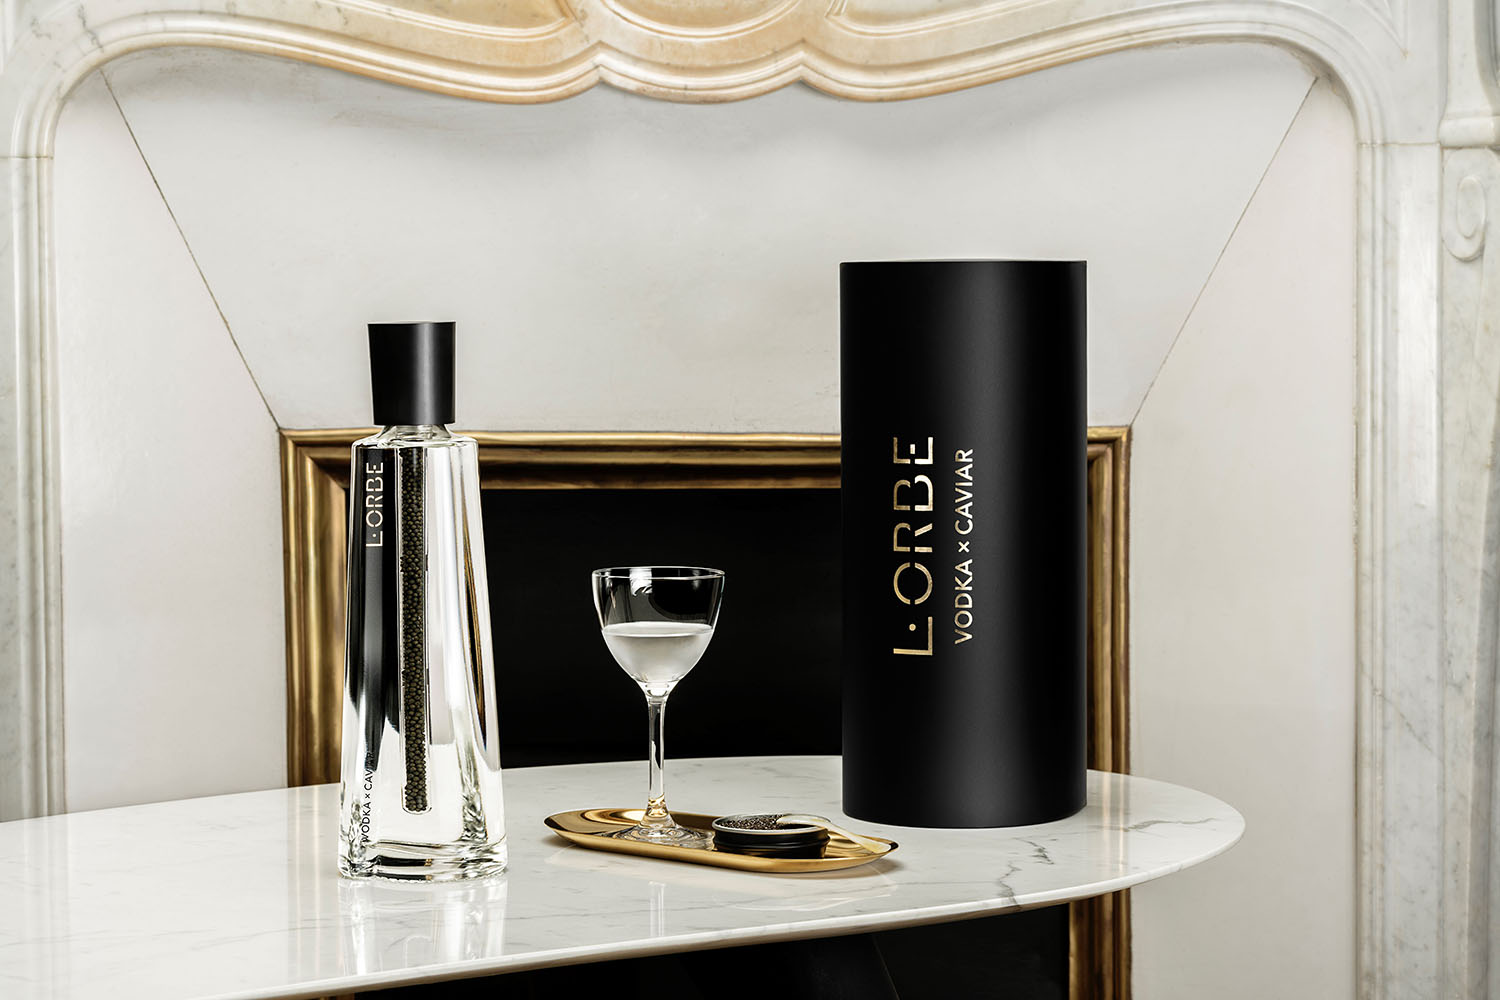 L’Orbe Vodka x Caviar, from Pernod Ricard - Breakthrough Innovation Group